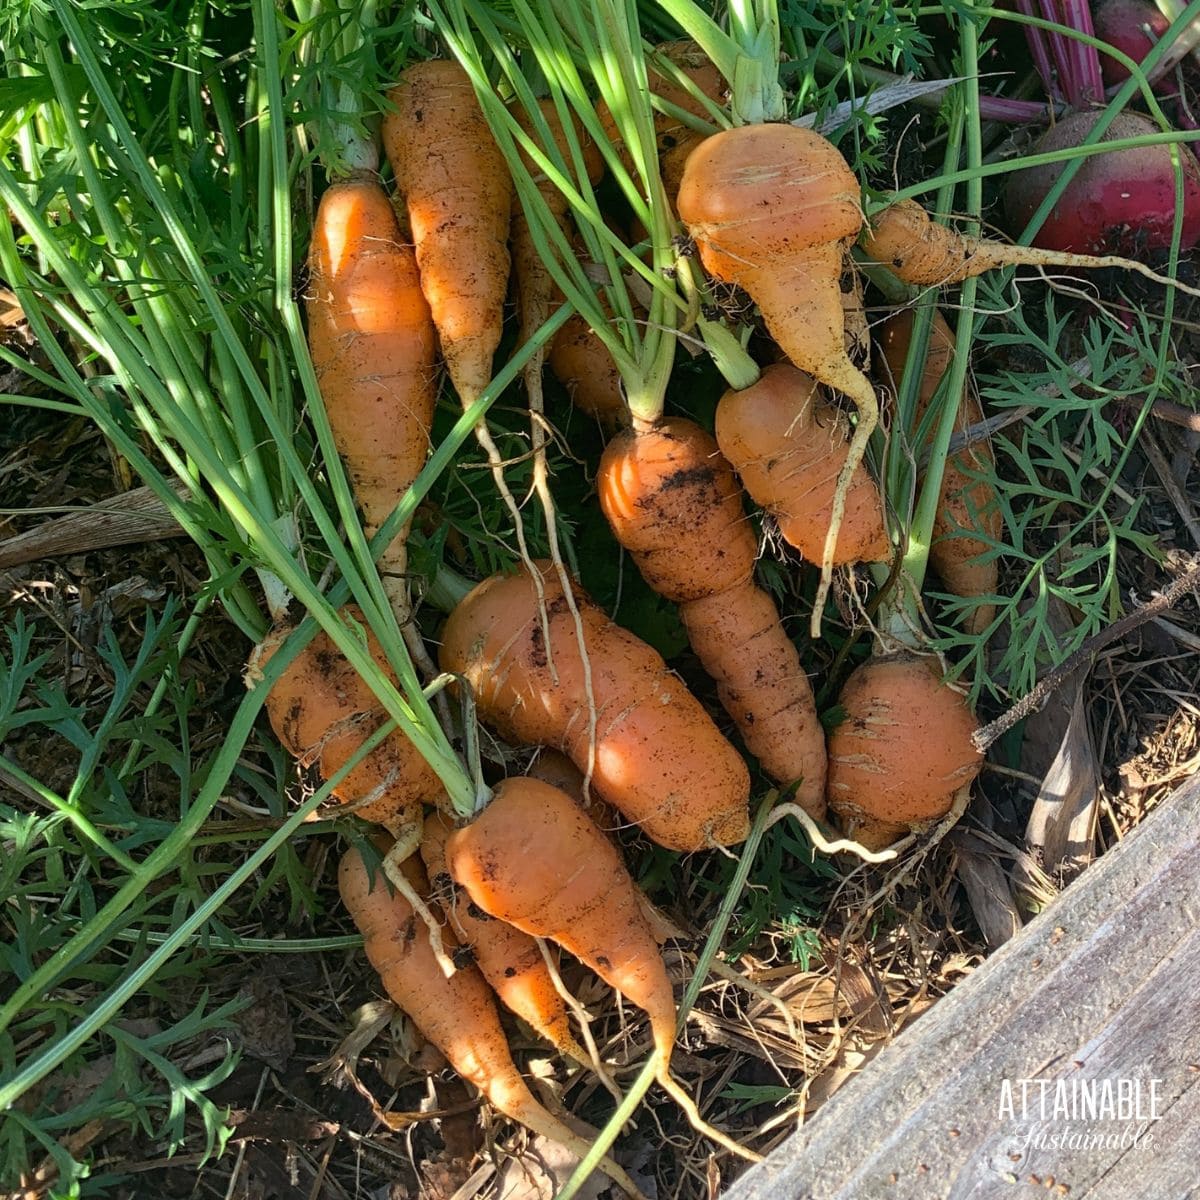 orange carrots recently pulled from the garden, greens still intact.